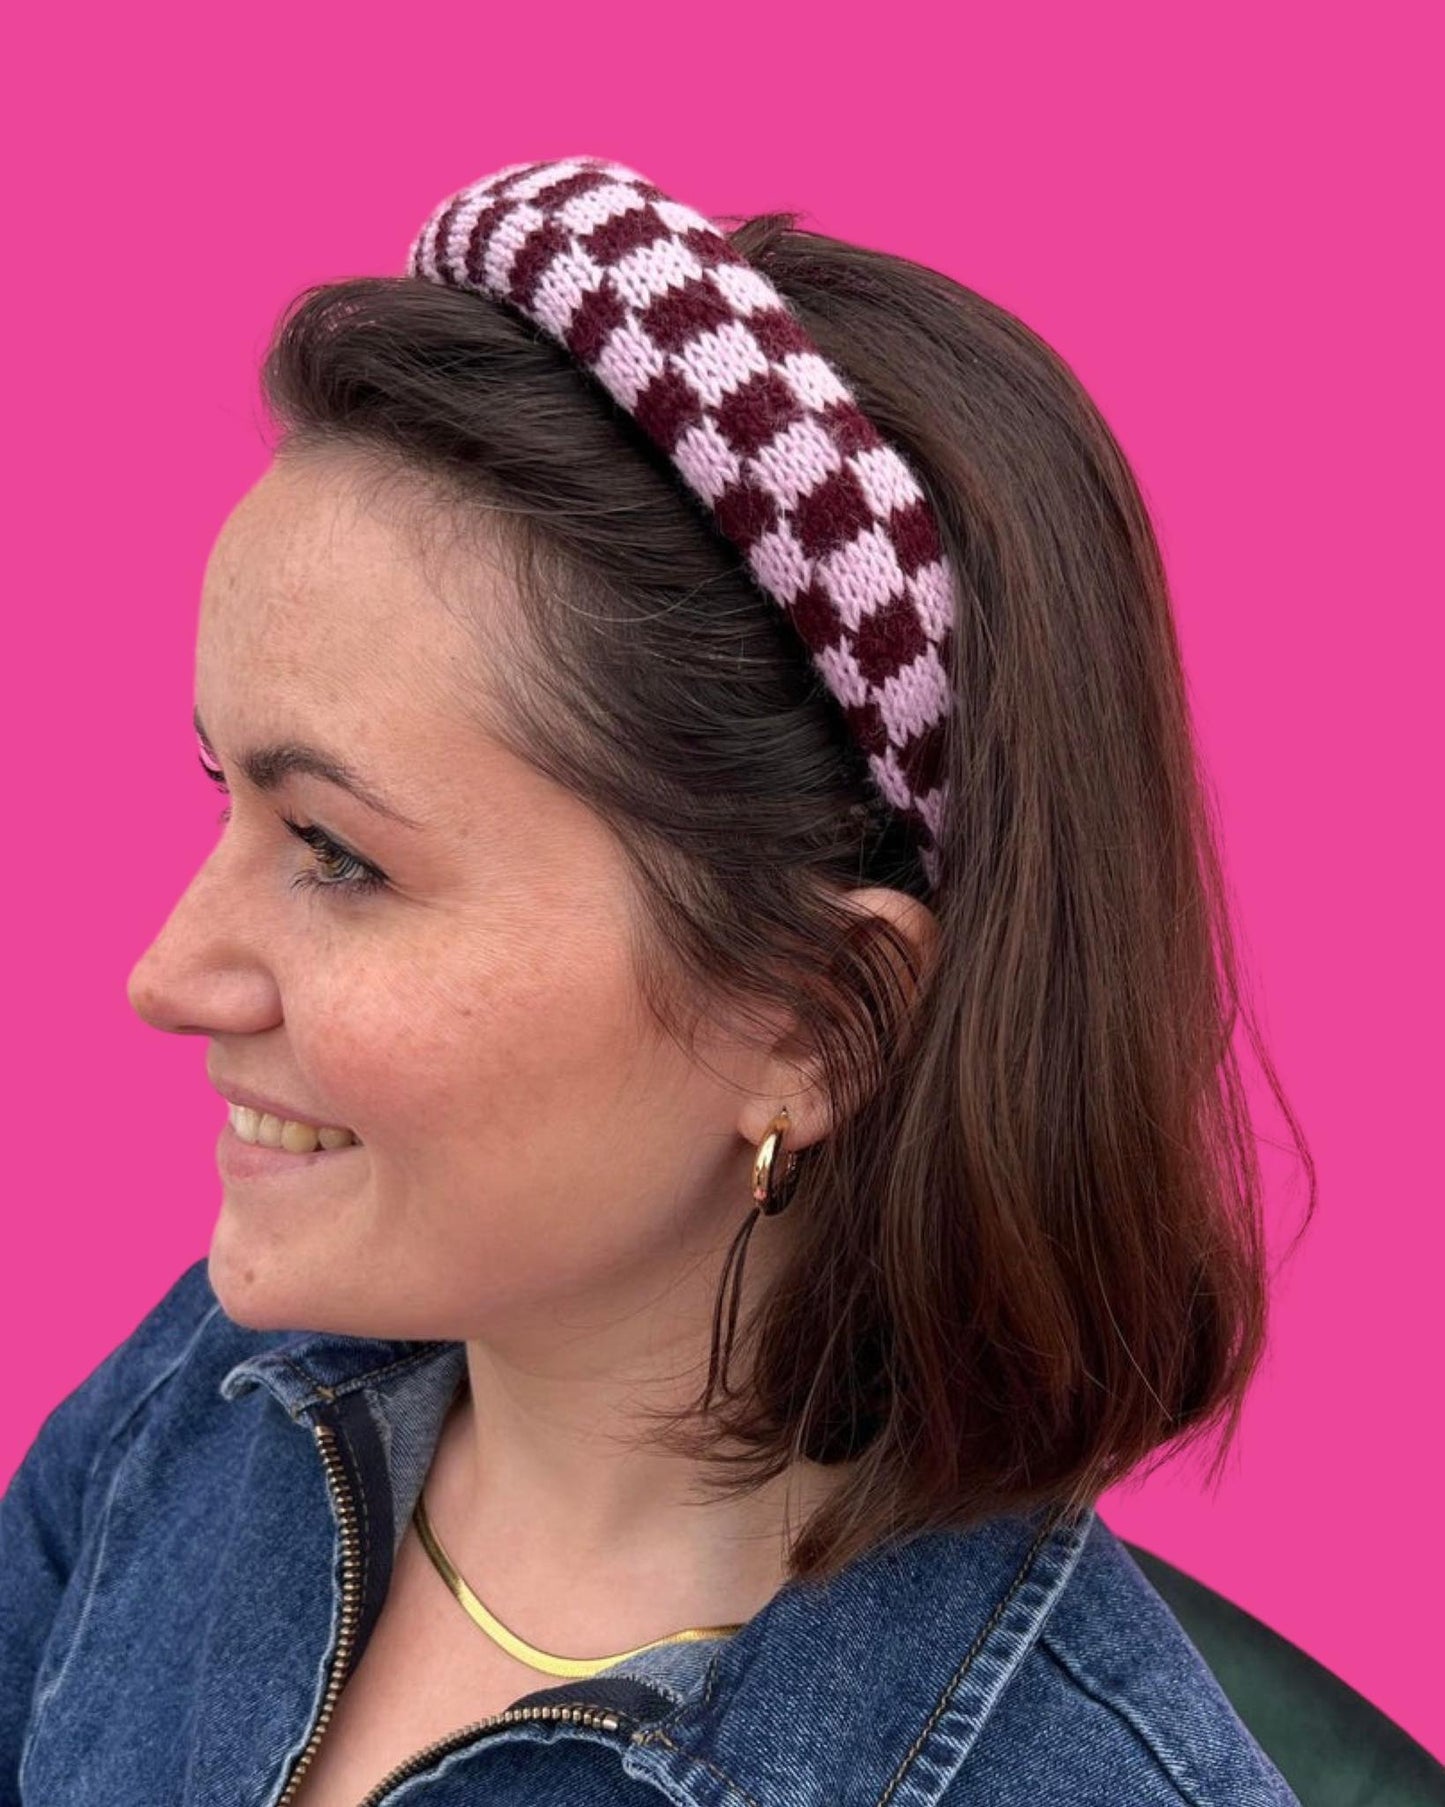 Headband - Check, Burgundy and Pale Lilac - READY TO SHIP